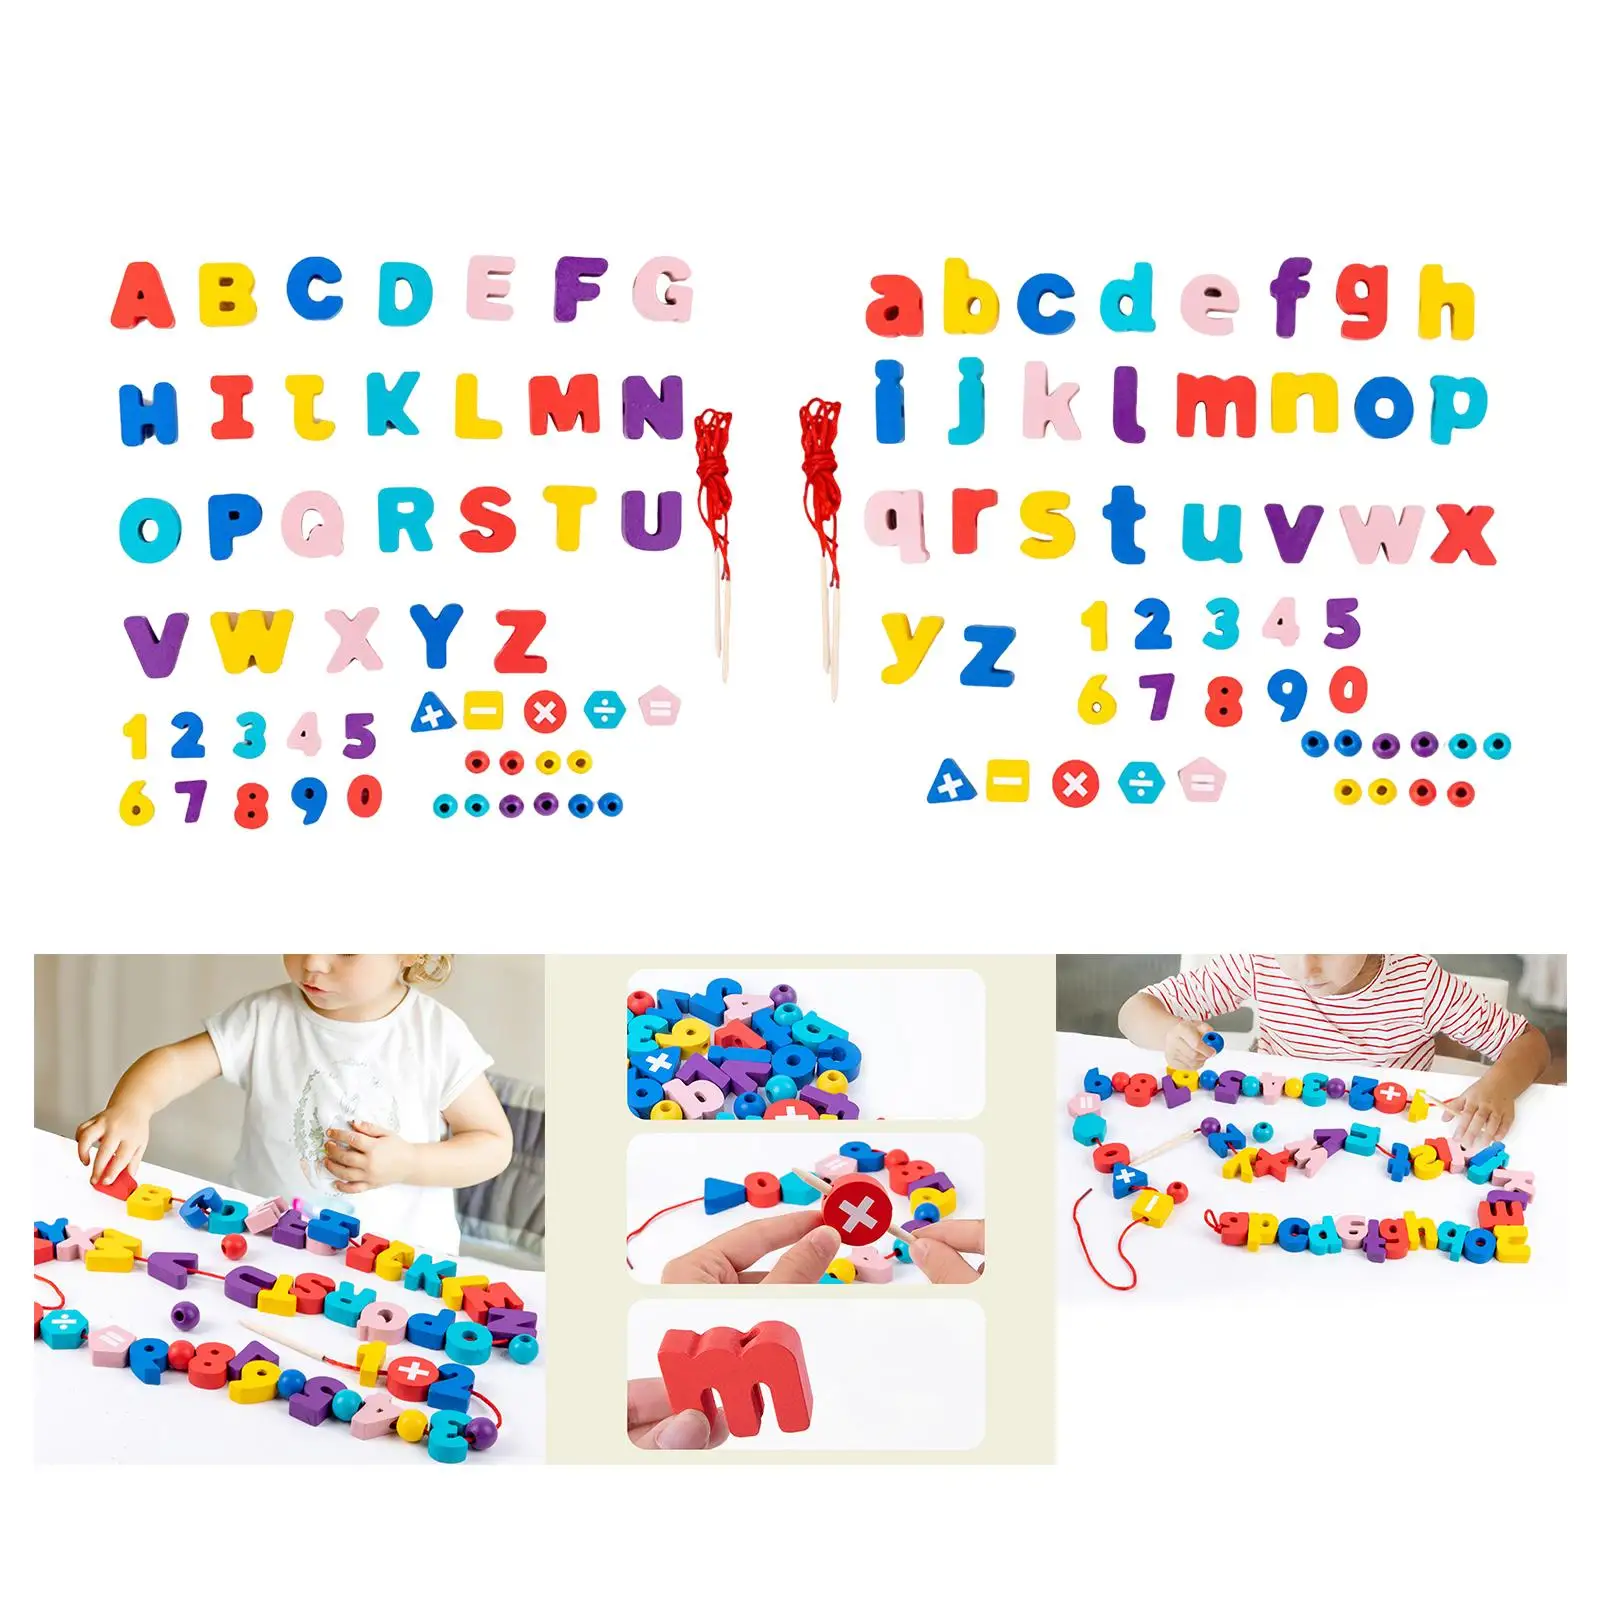 Abc Letters Threading Toy Math Learning Activities for Kids Birthday Gift